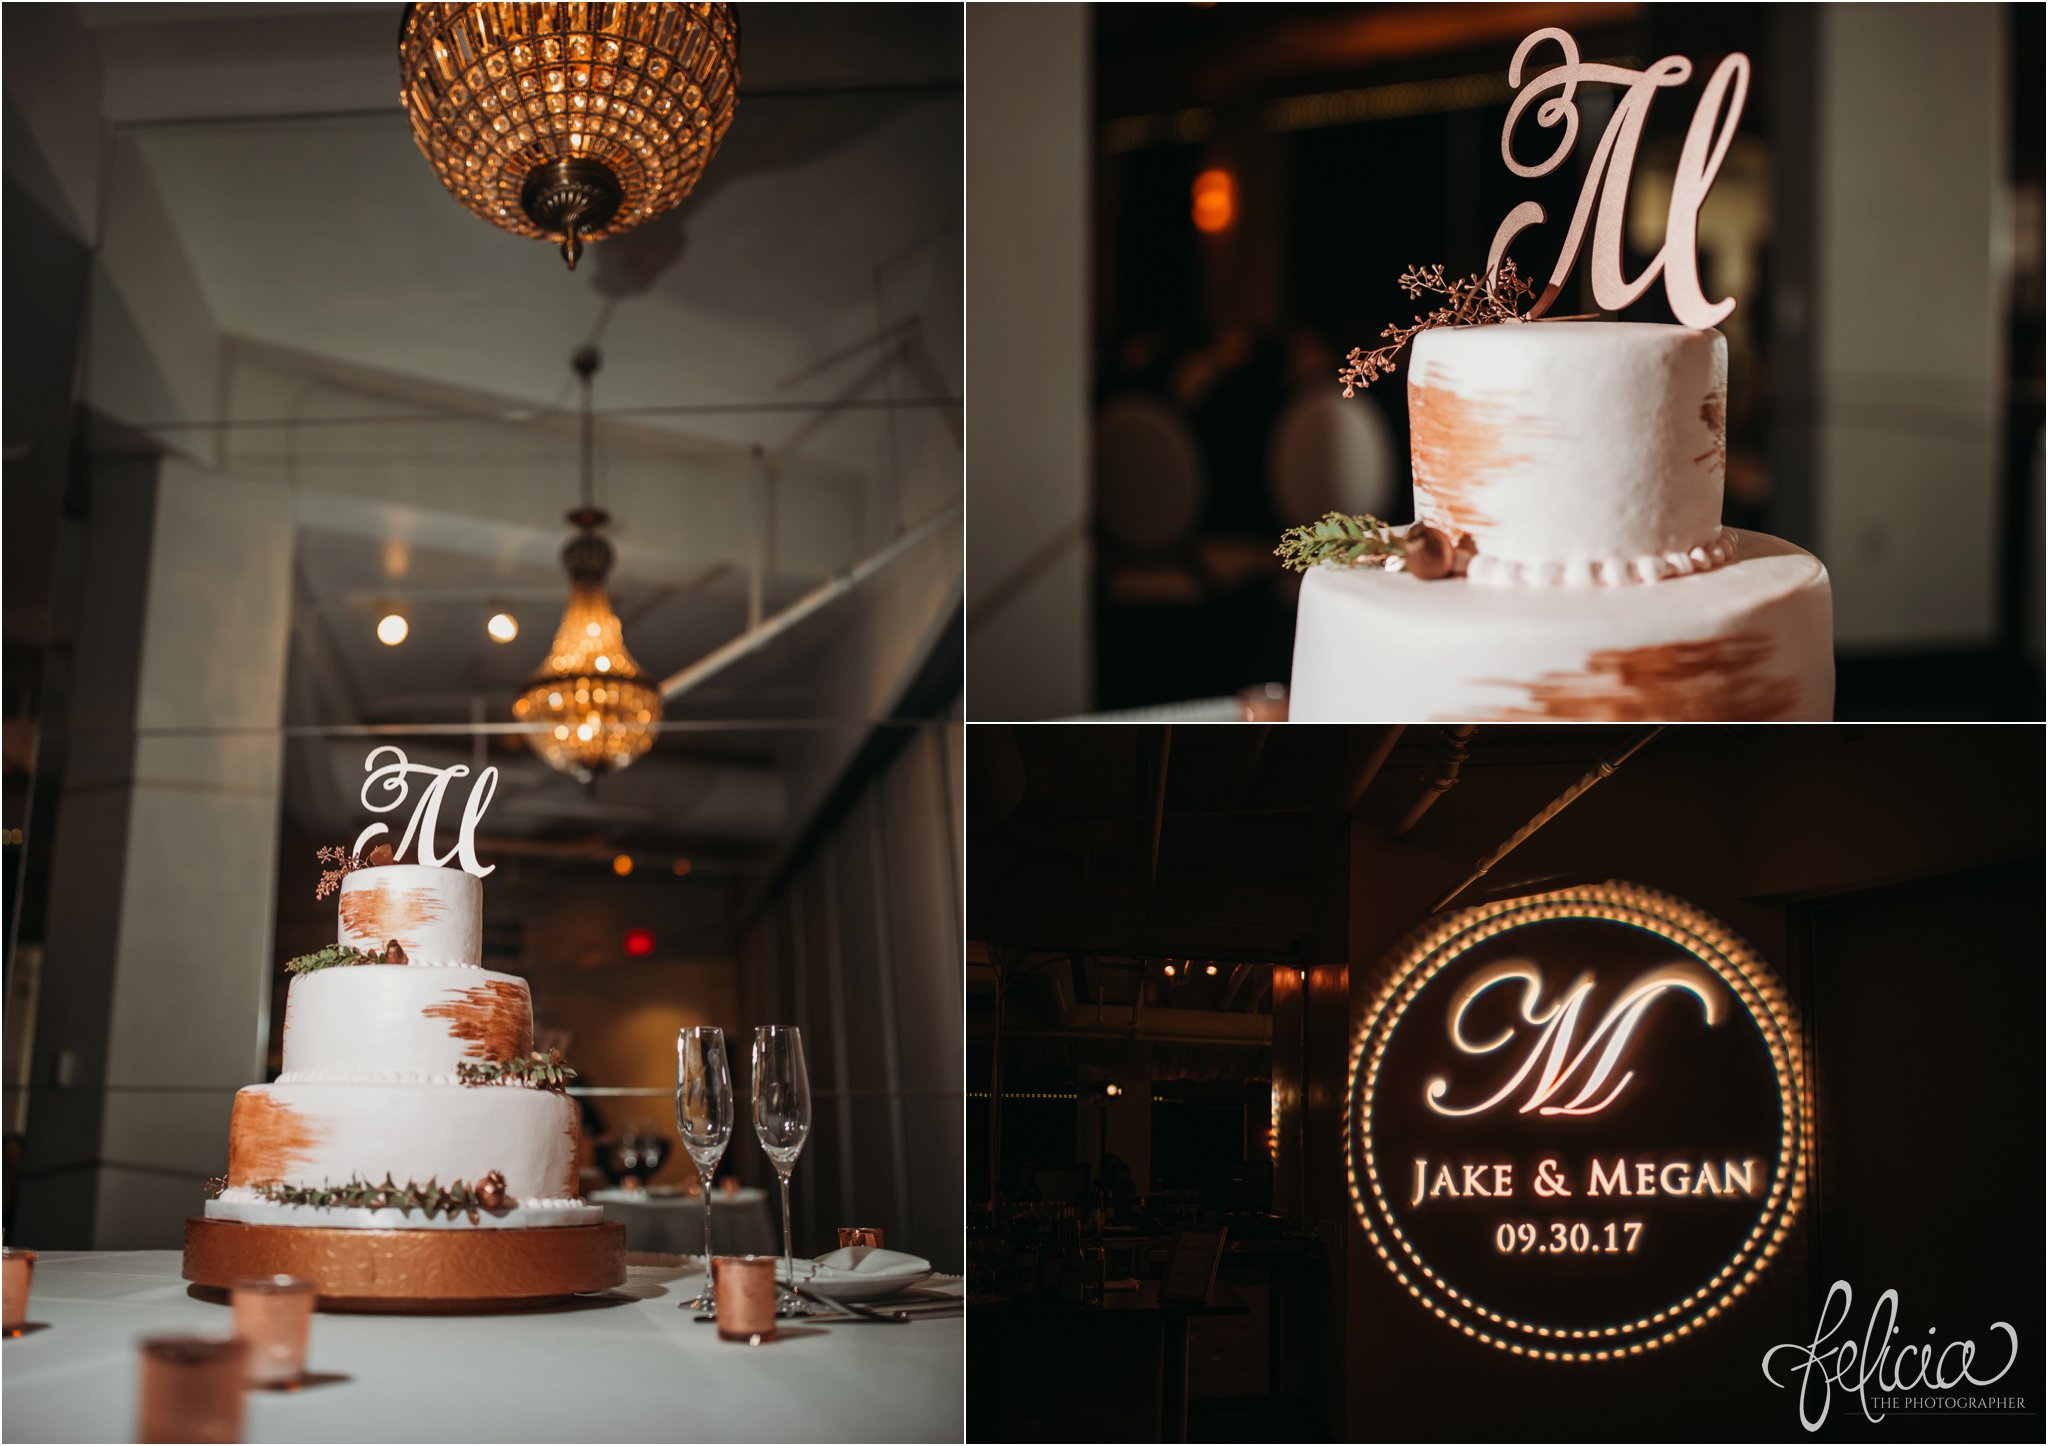 images by feliciathephotographer.com | wedding photographer | kansas city | chandelier | details | reception | initial | raw styled cake | rustic | candles | champagne flutes | date | 